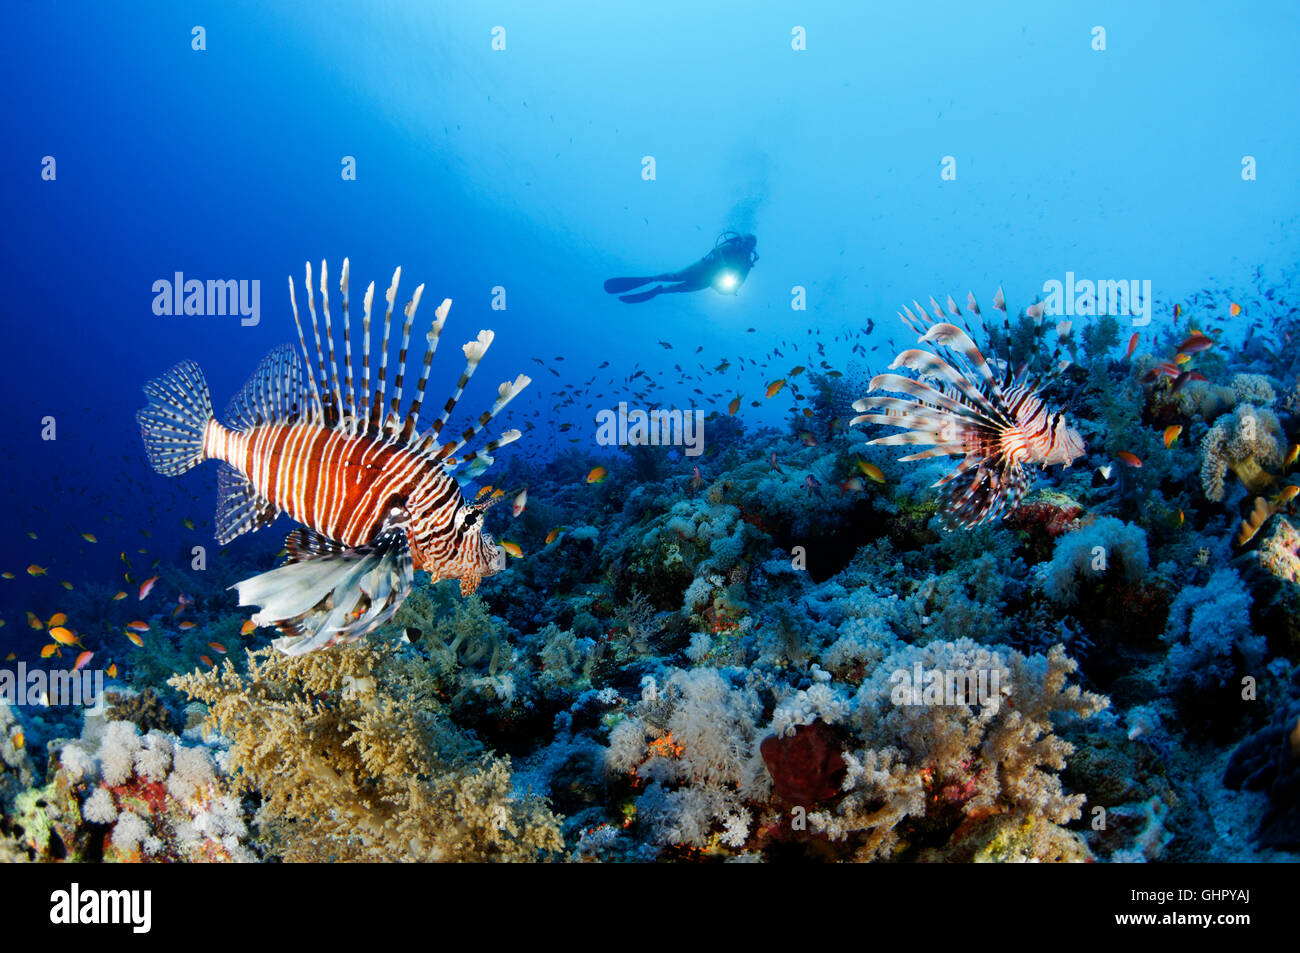 Pterois miles, Devil Firefish or Common Lionfish and scuba diver, Elphinestone Reef, Red Sea, Egypt, Africa Stock Photo